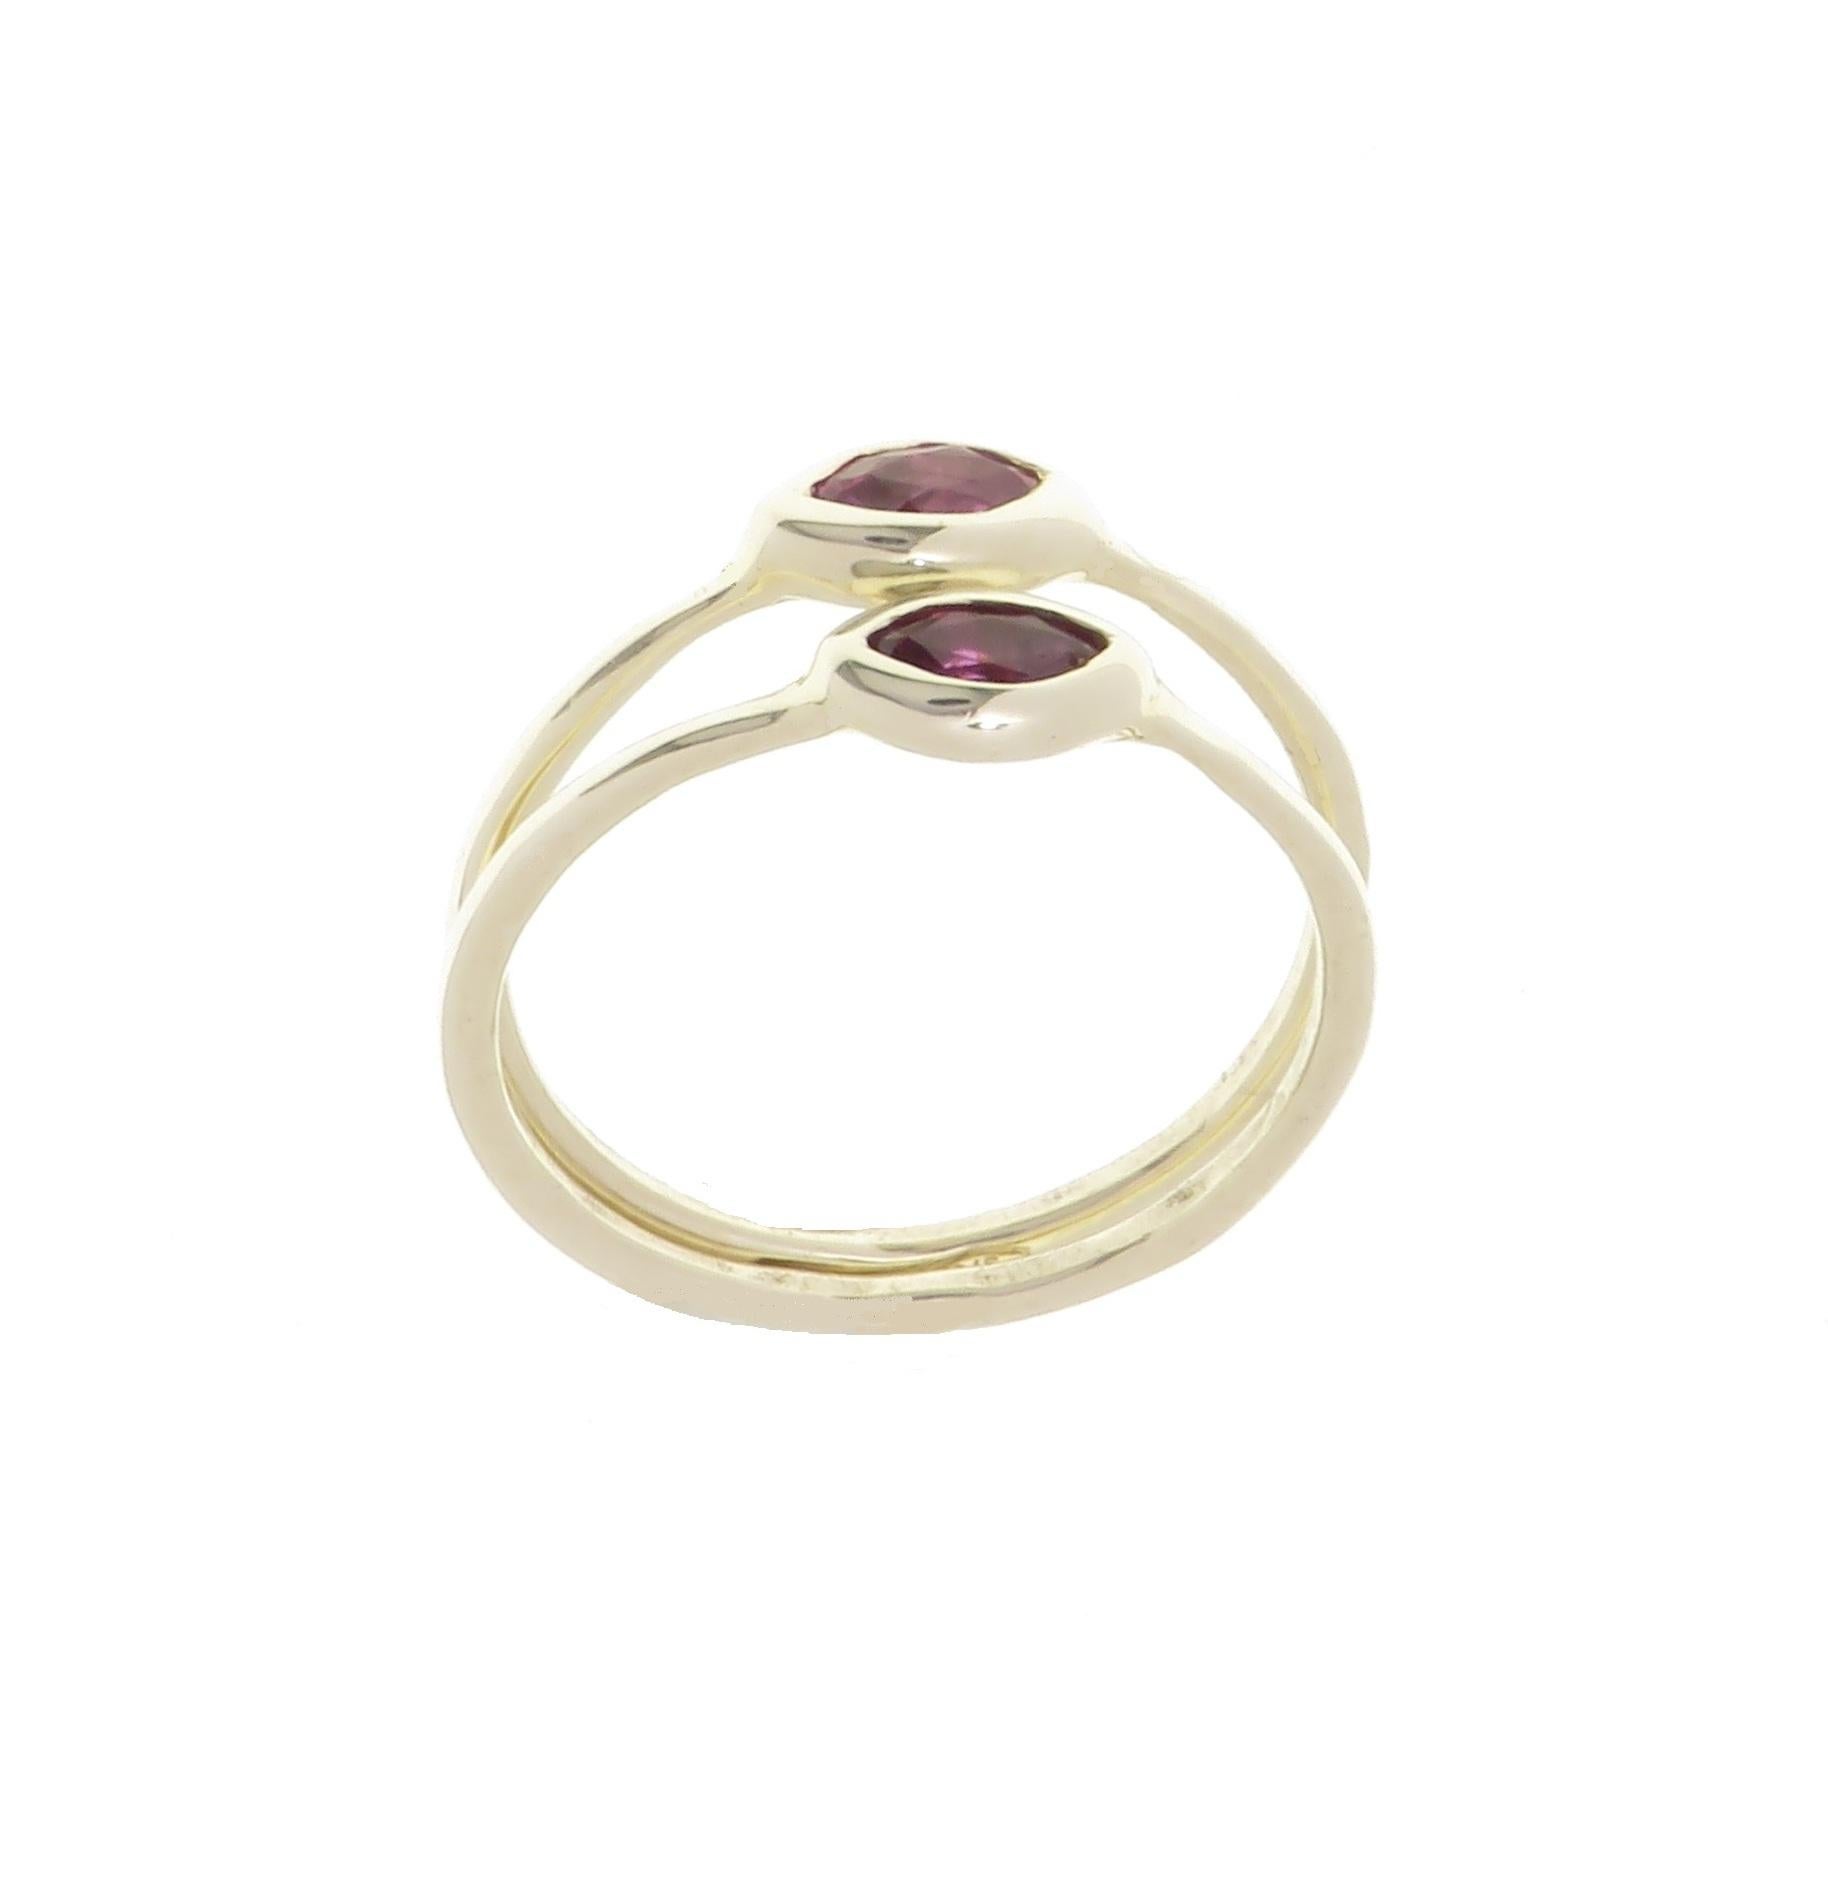 Rubies 9 Karat White Gold Stacking Ring Handcrafted in Italy 2